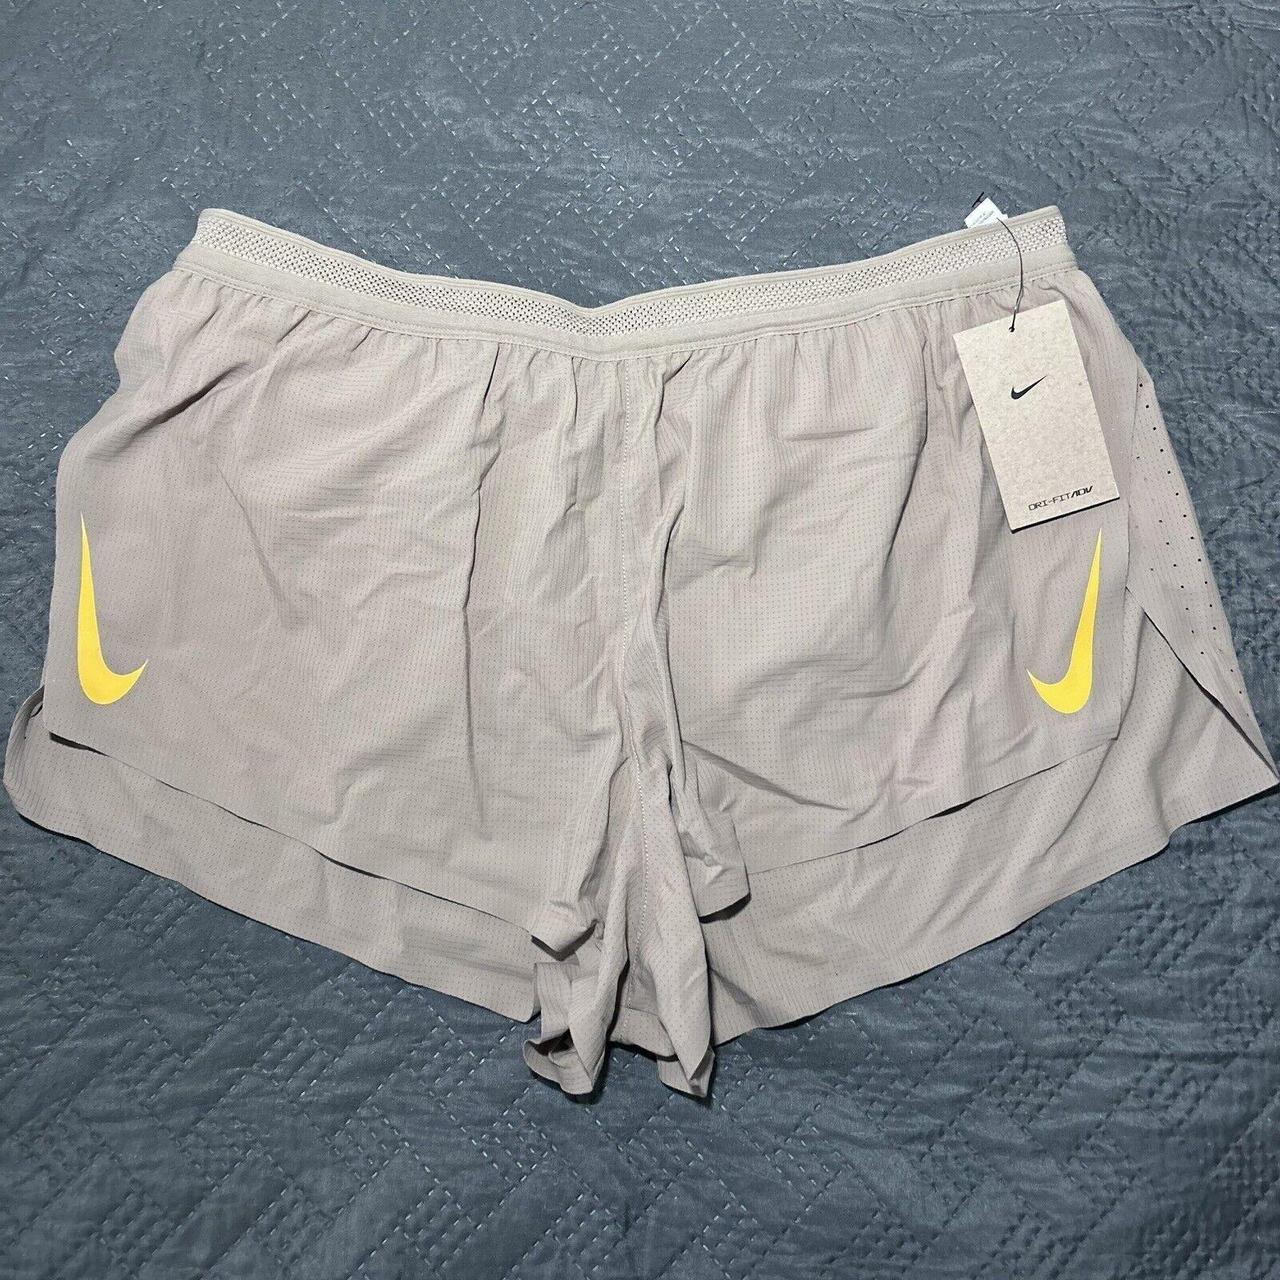 Stay stylish and comfortable with these Nike Aeroswift Shorts